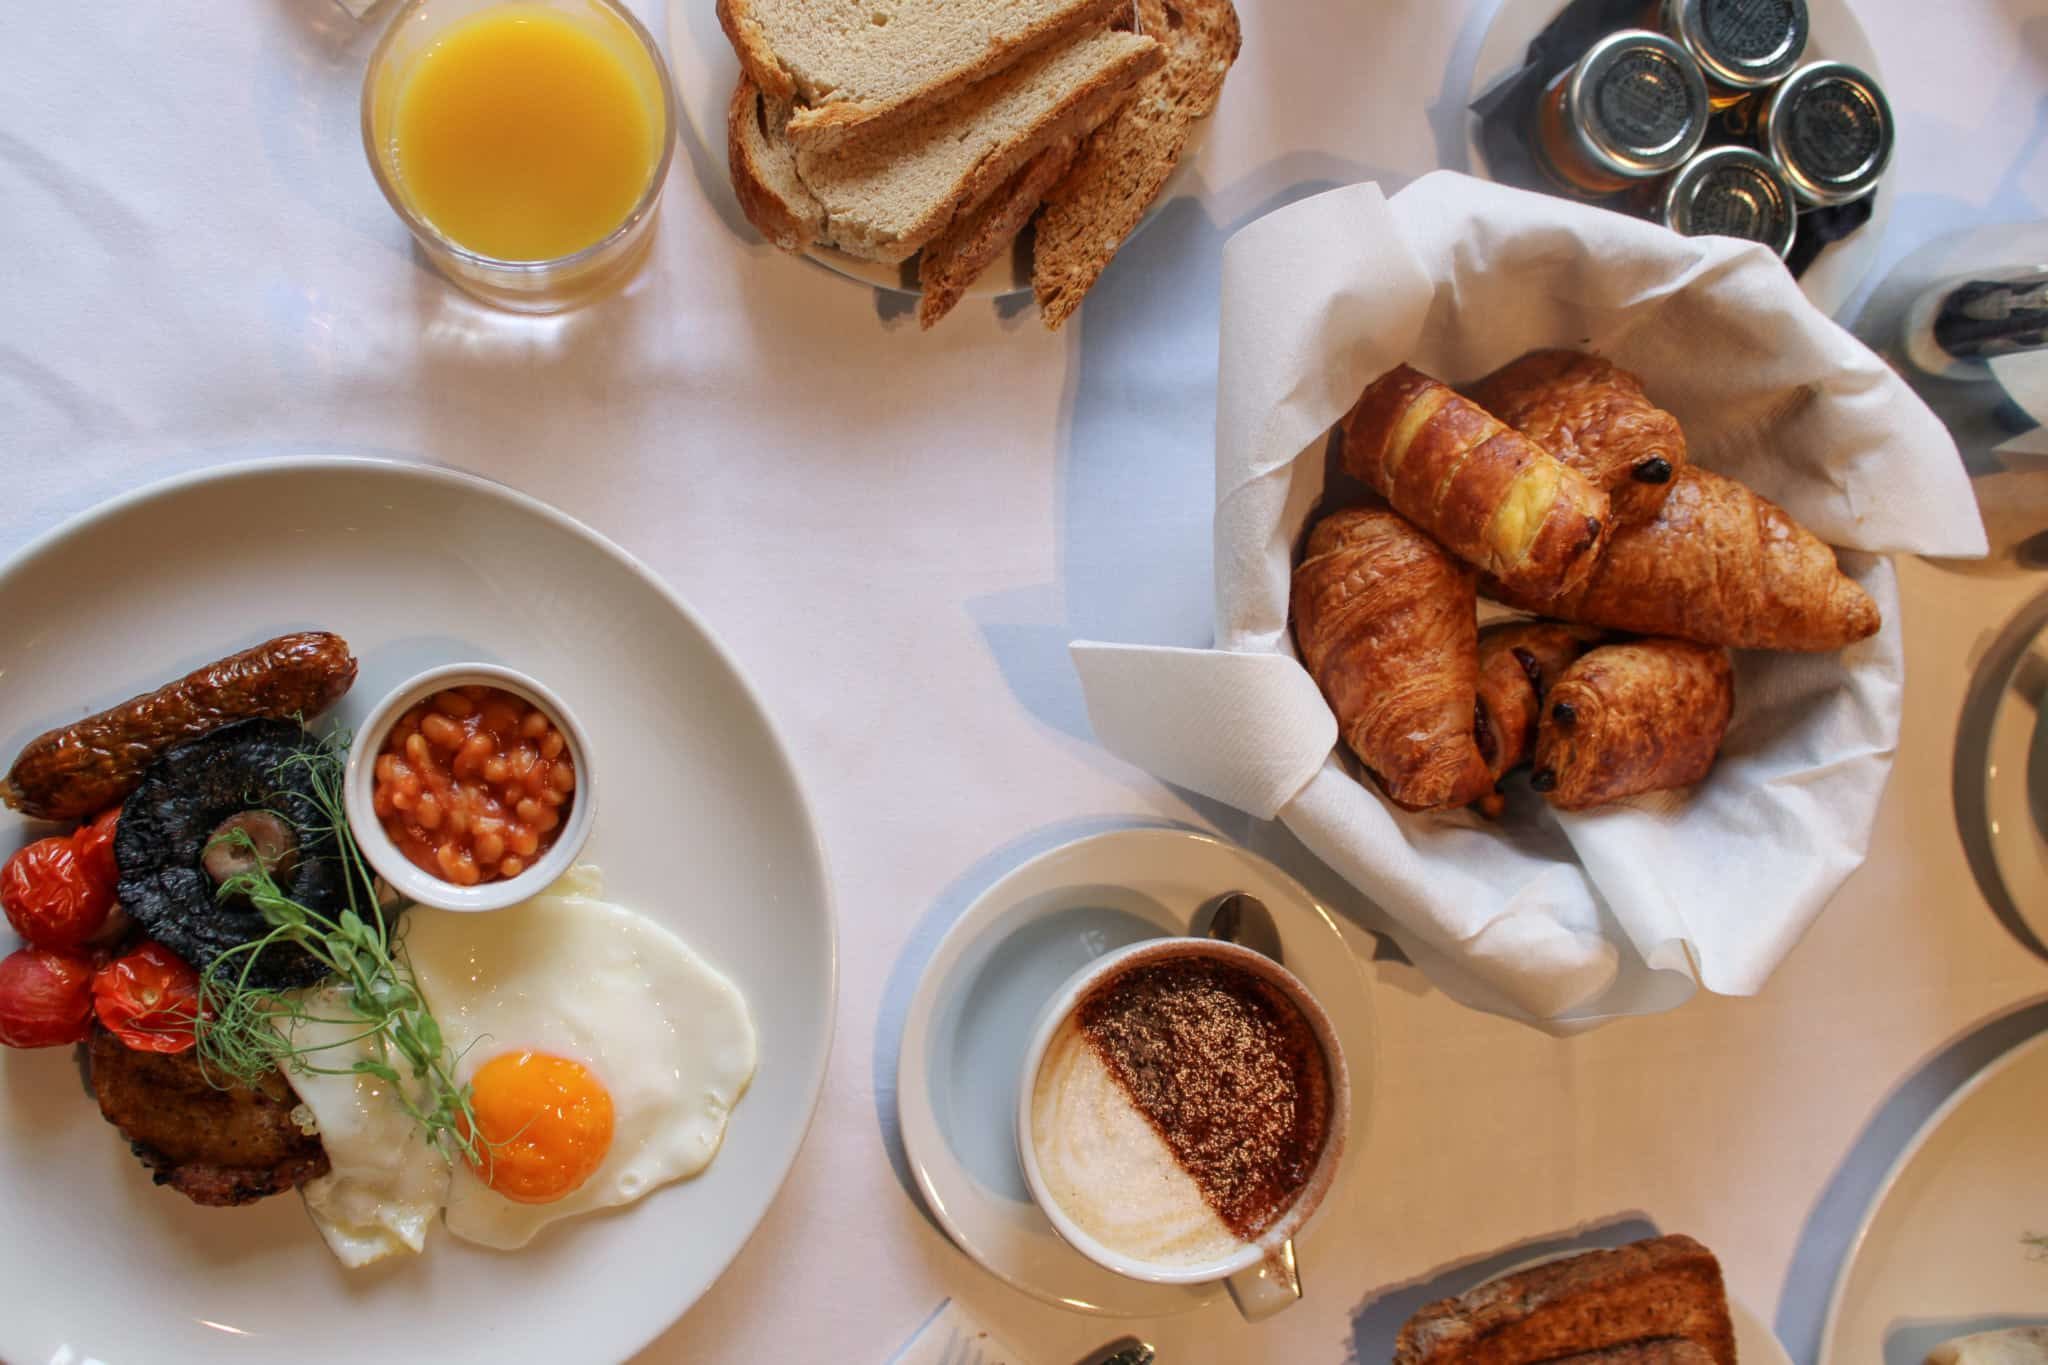 English breakfast and pastries